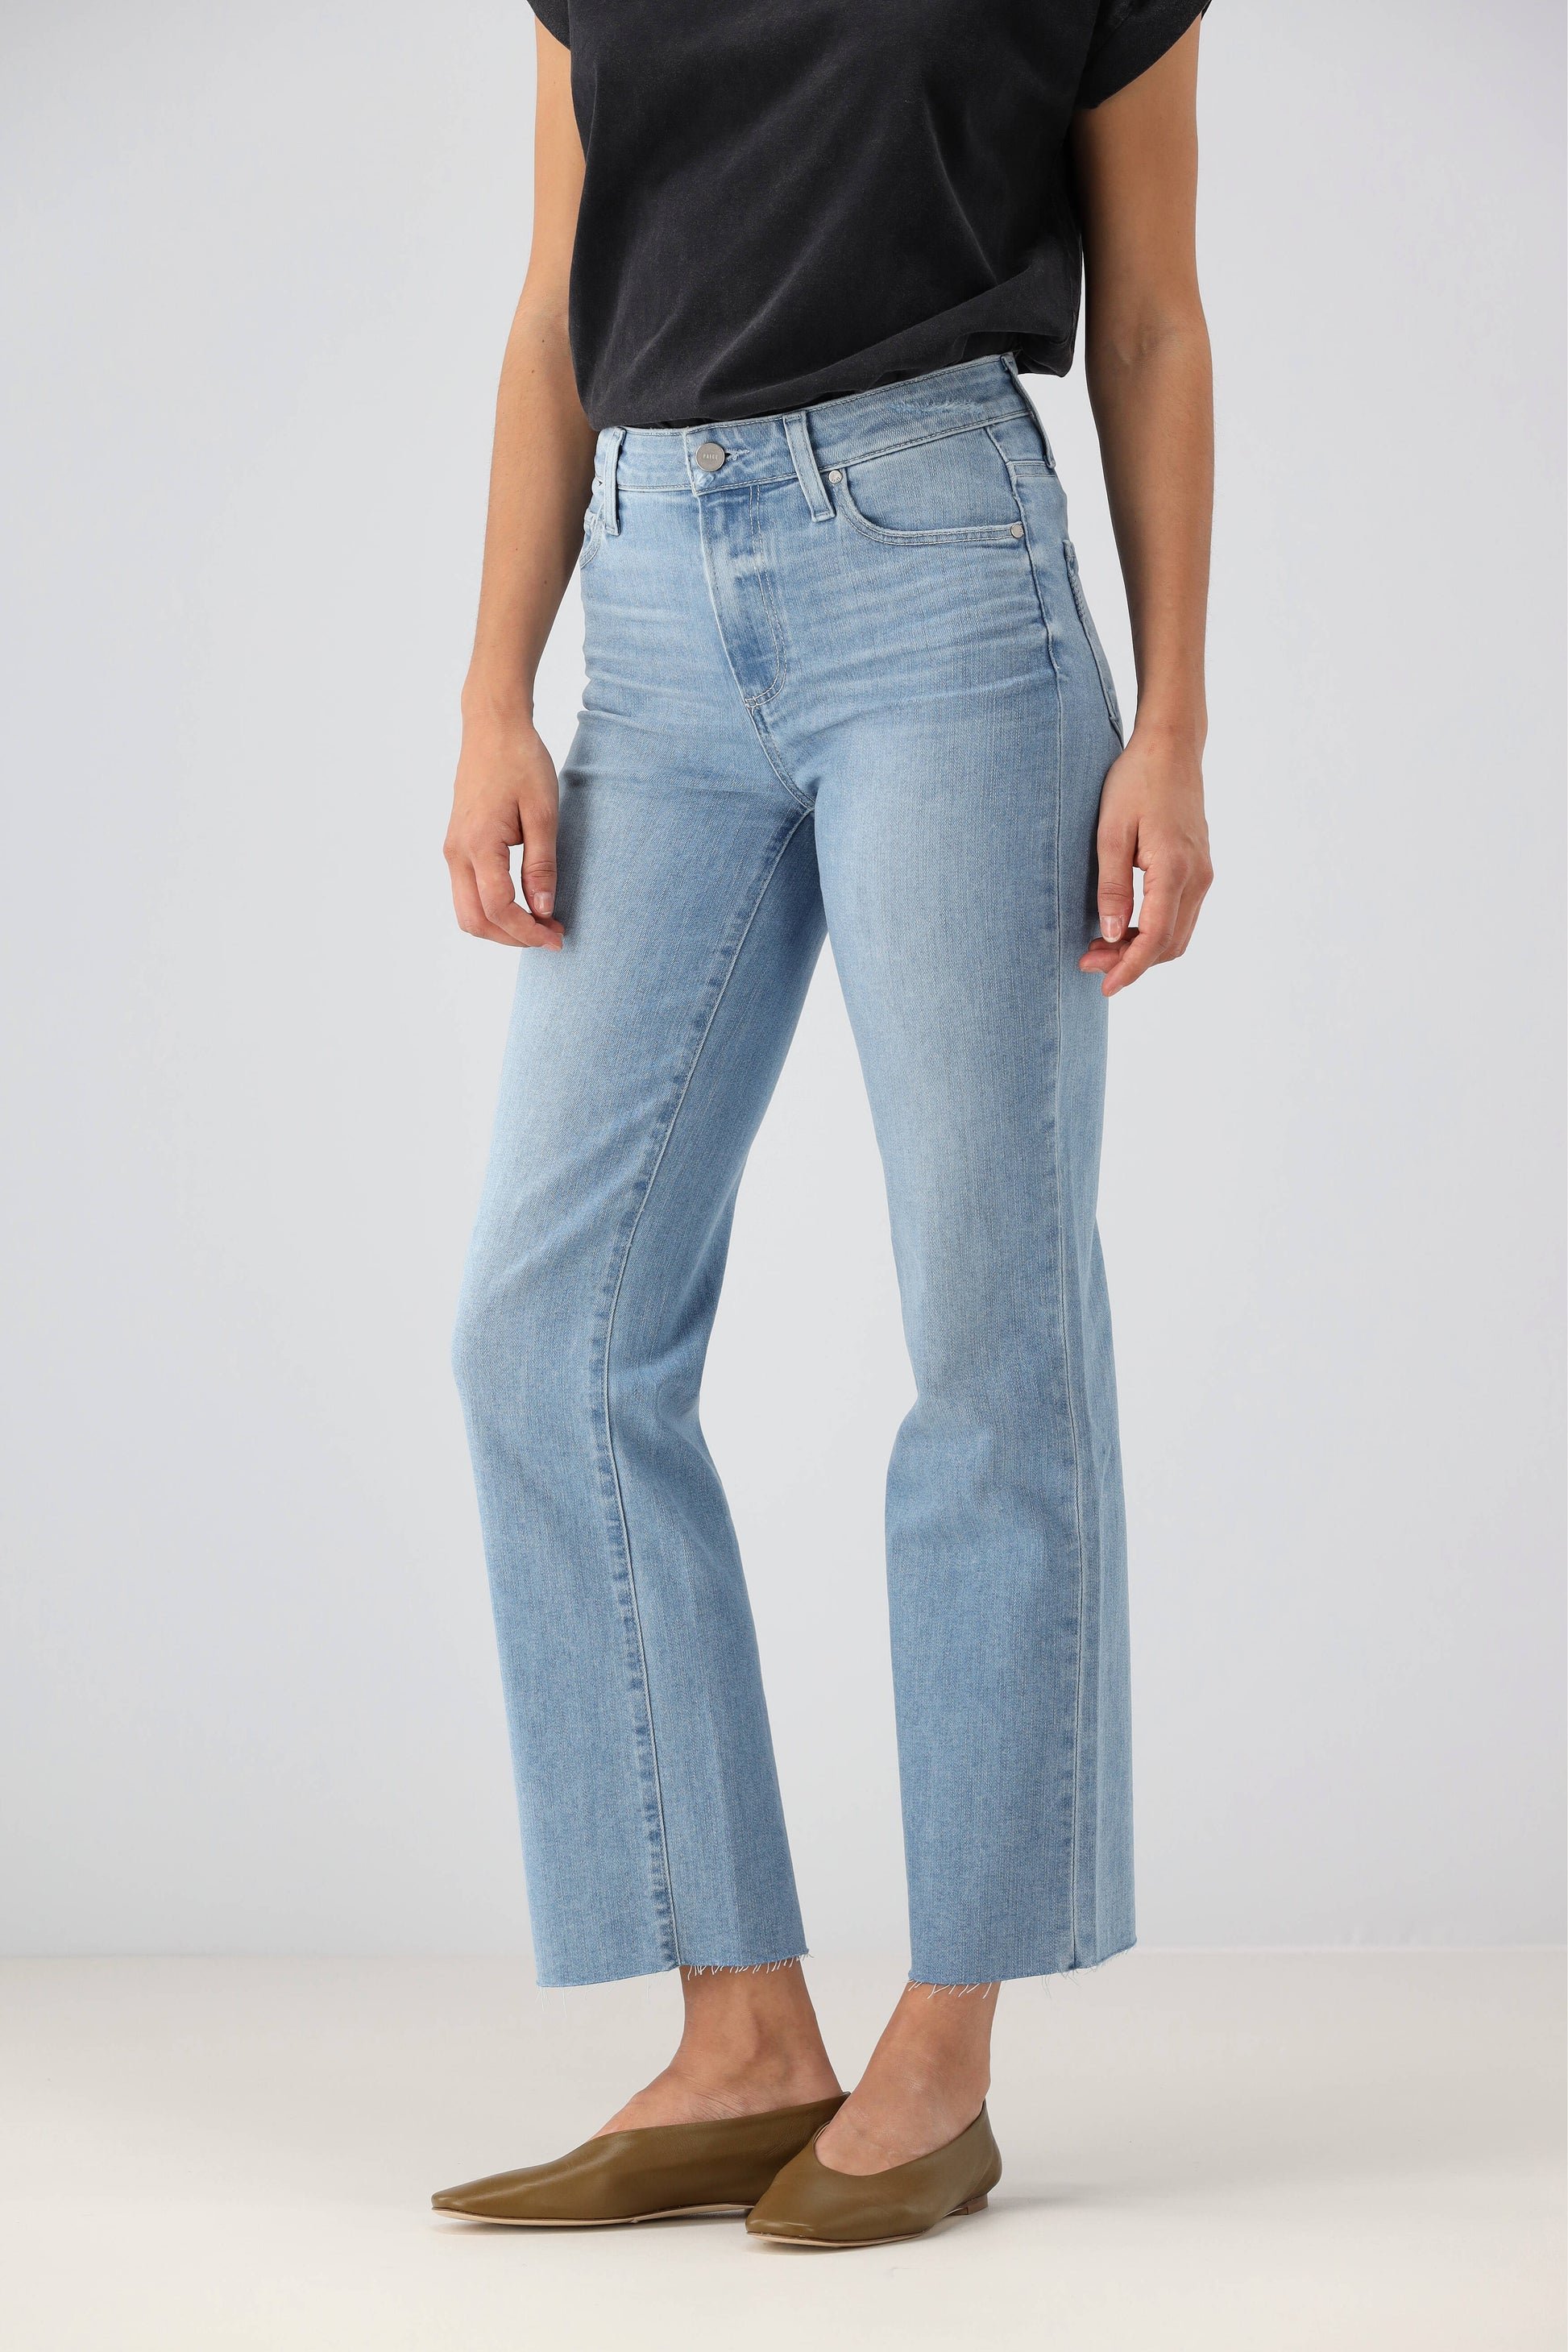 Jeans Relaxed Colette Raw Hem in JamaPaige - Anita Hass